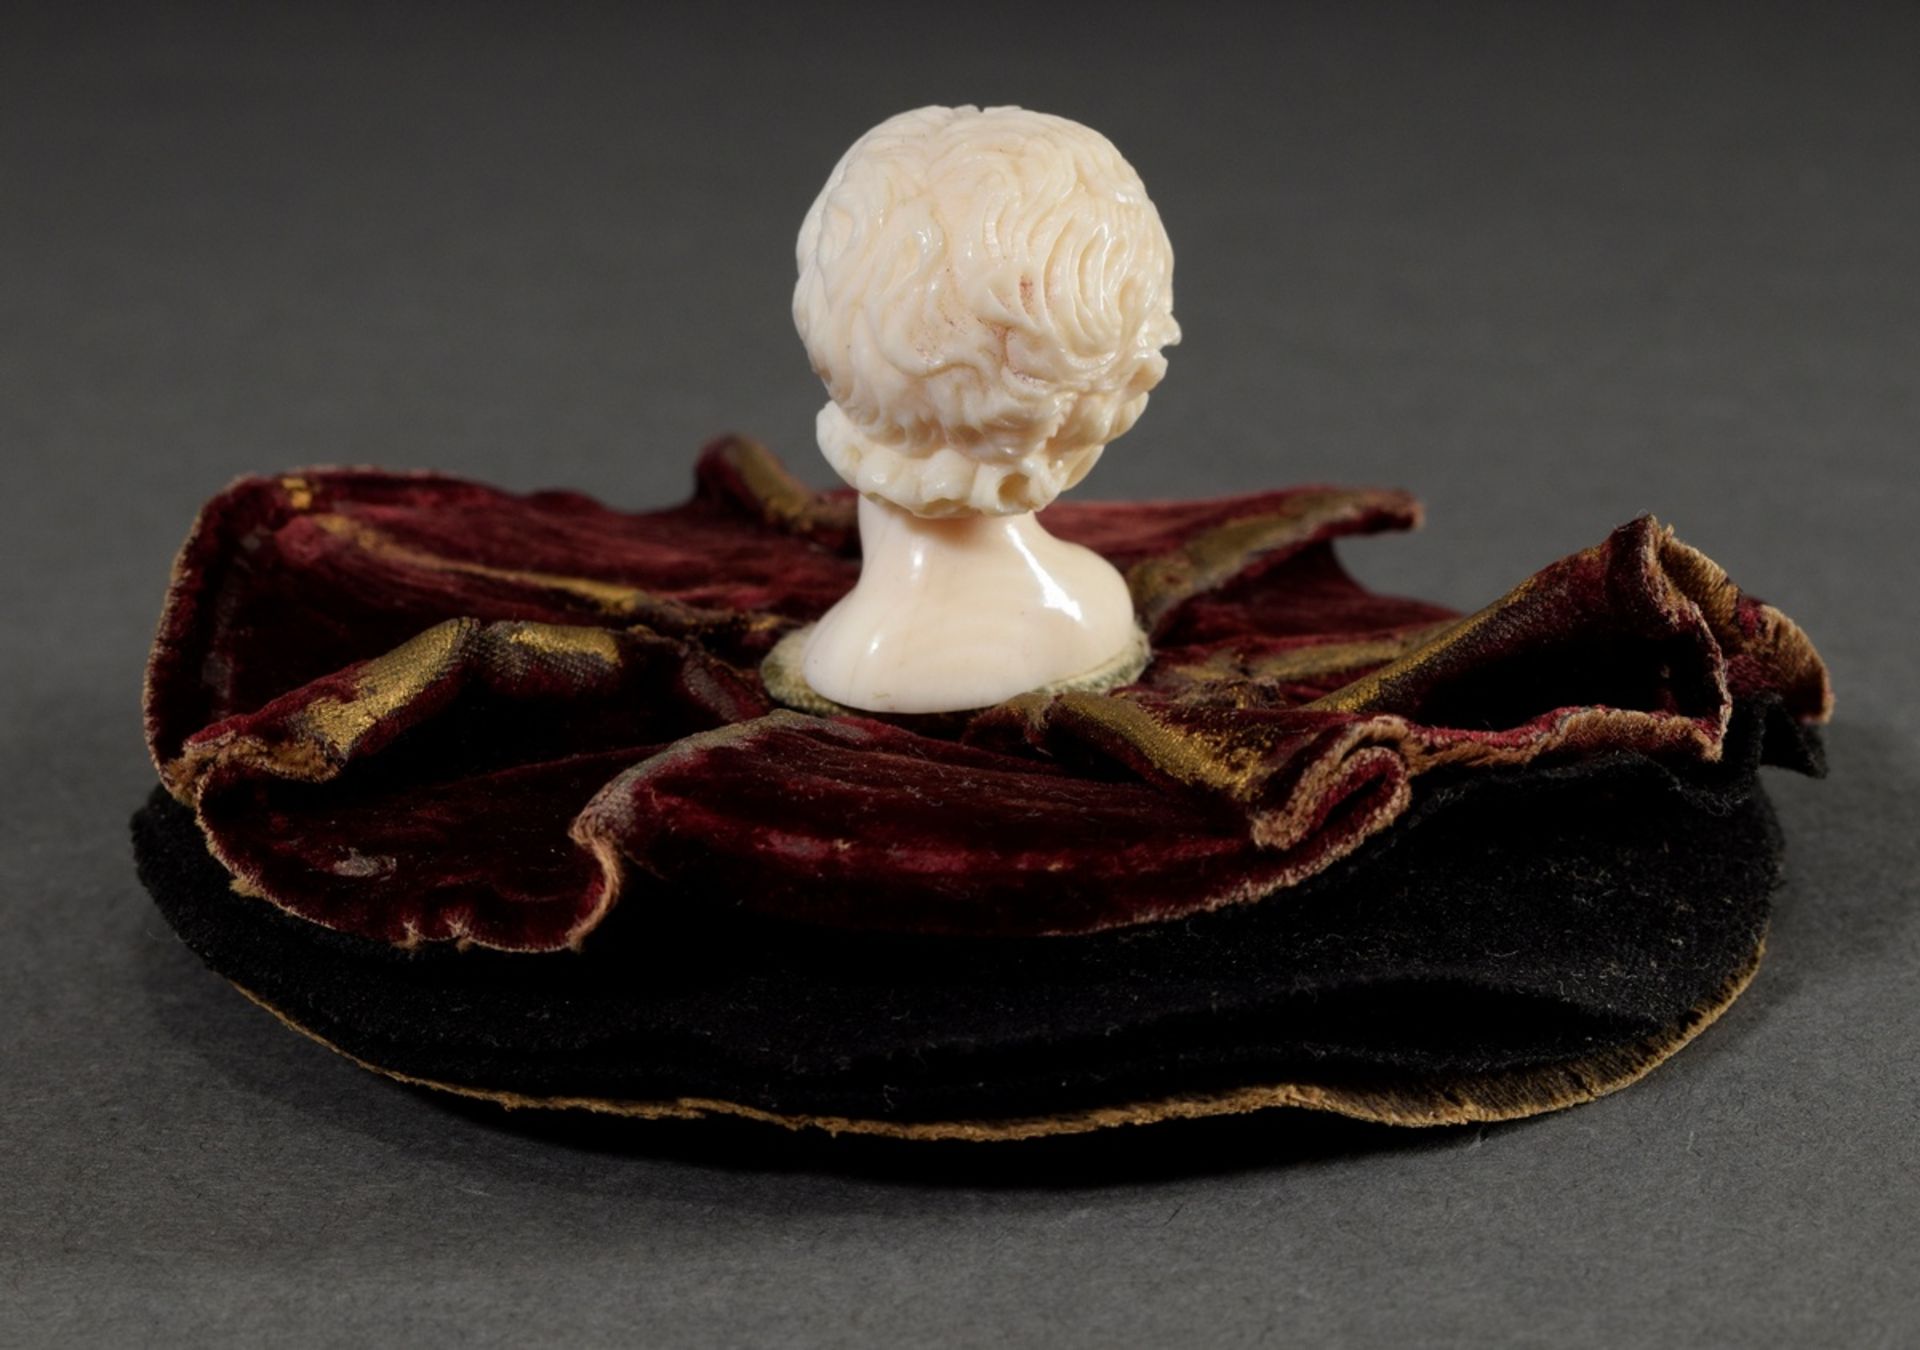 Historism ivory carving "boy's head" mounted on a round red velvet pincushion, end of 19th century, - Image 2 of 5